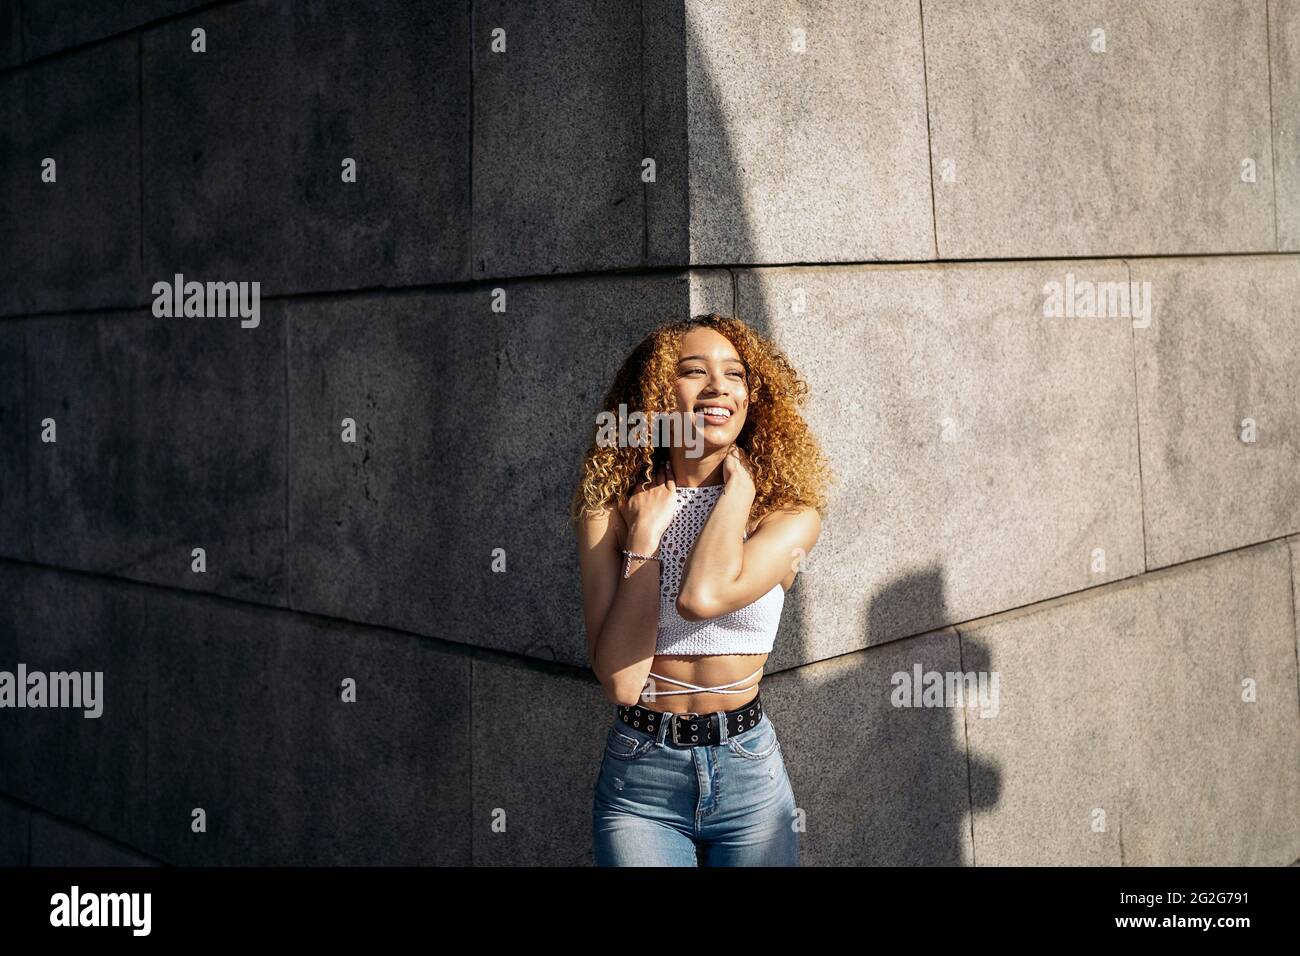 Portrait Of Latin Girl in the city Stock Photo